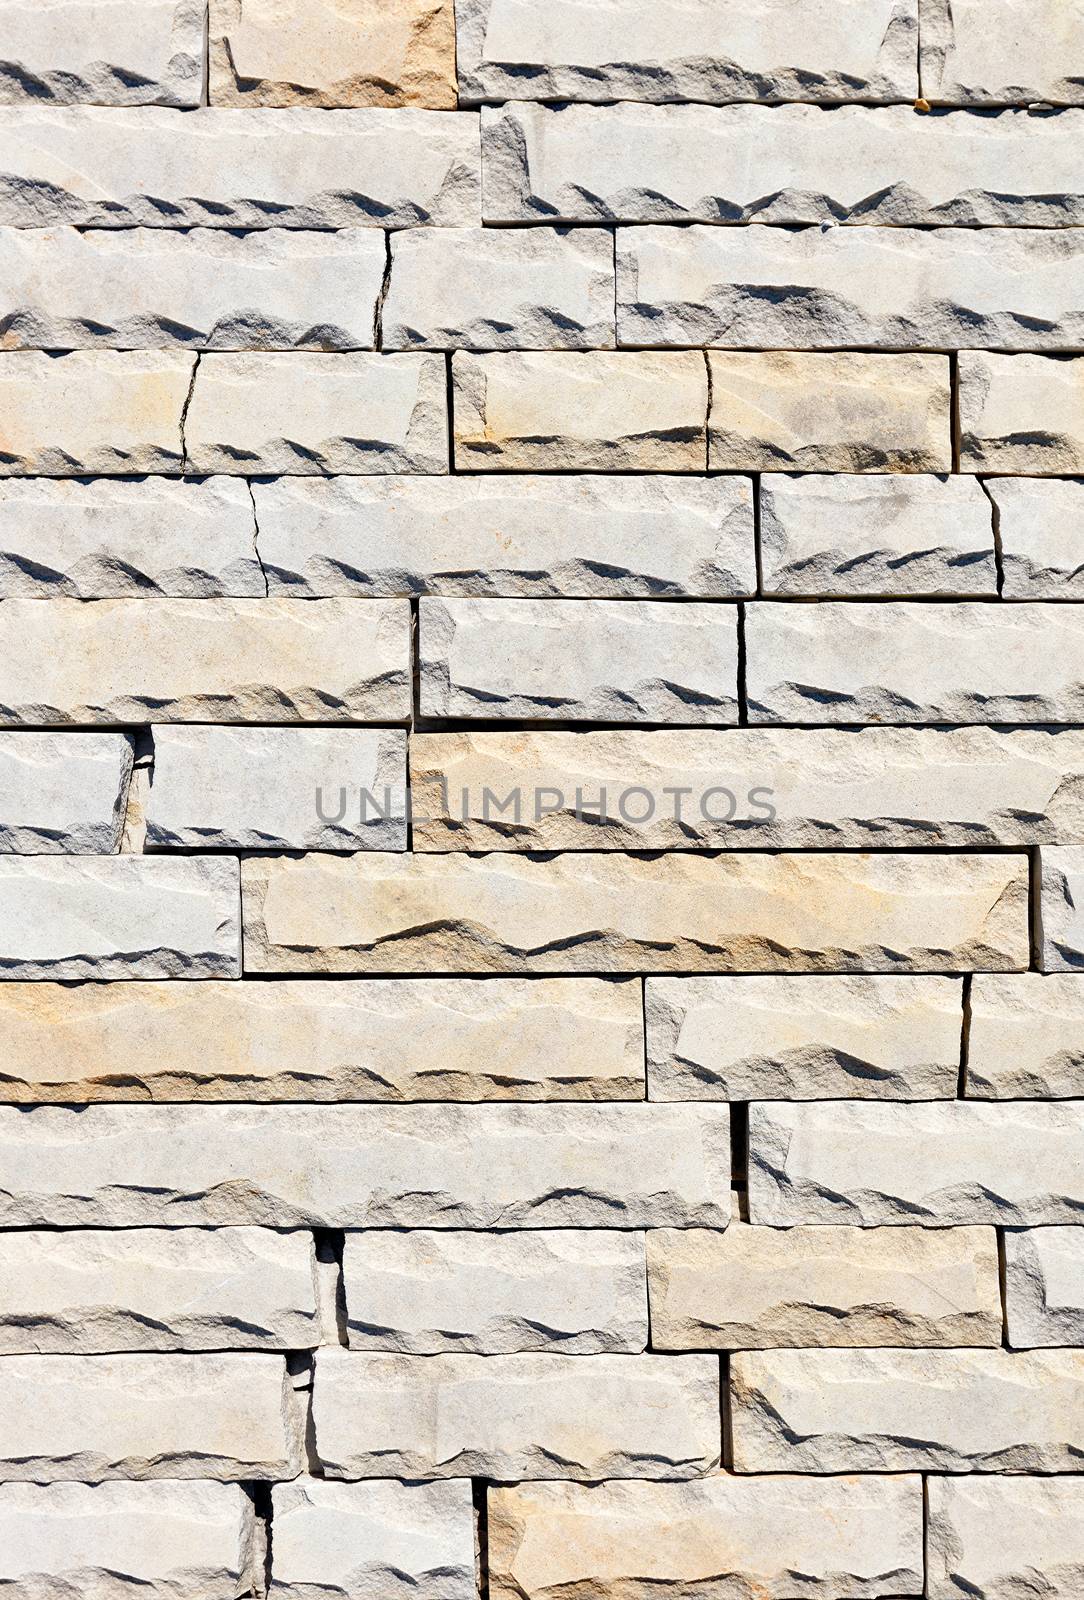 Background and surface texture of tiles of gray and yellow sandstone with chipping and cracks along the perimeter, close-up, vertical image.